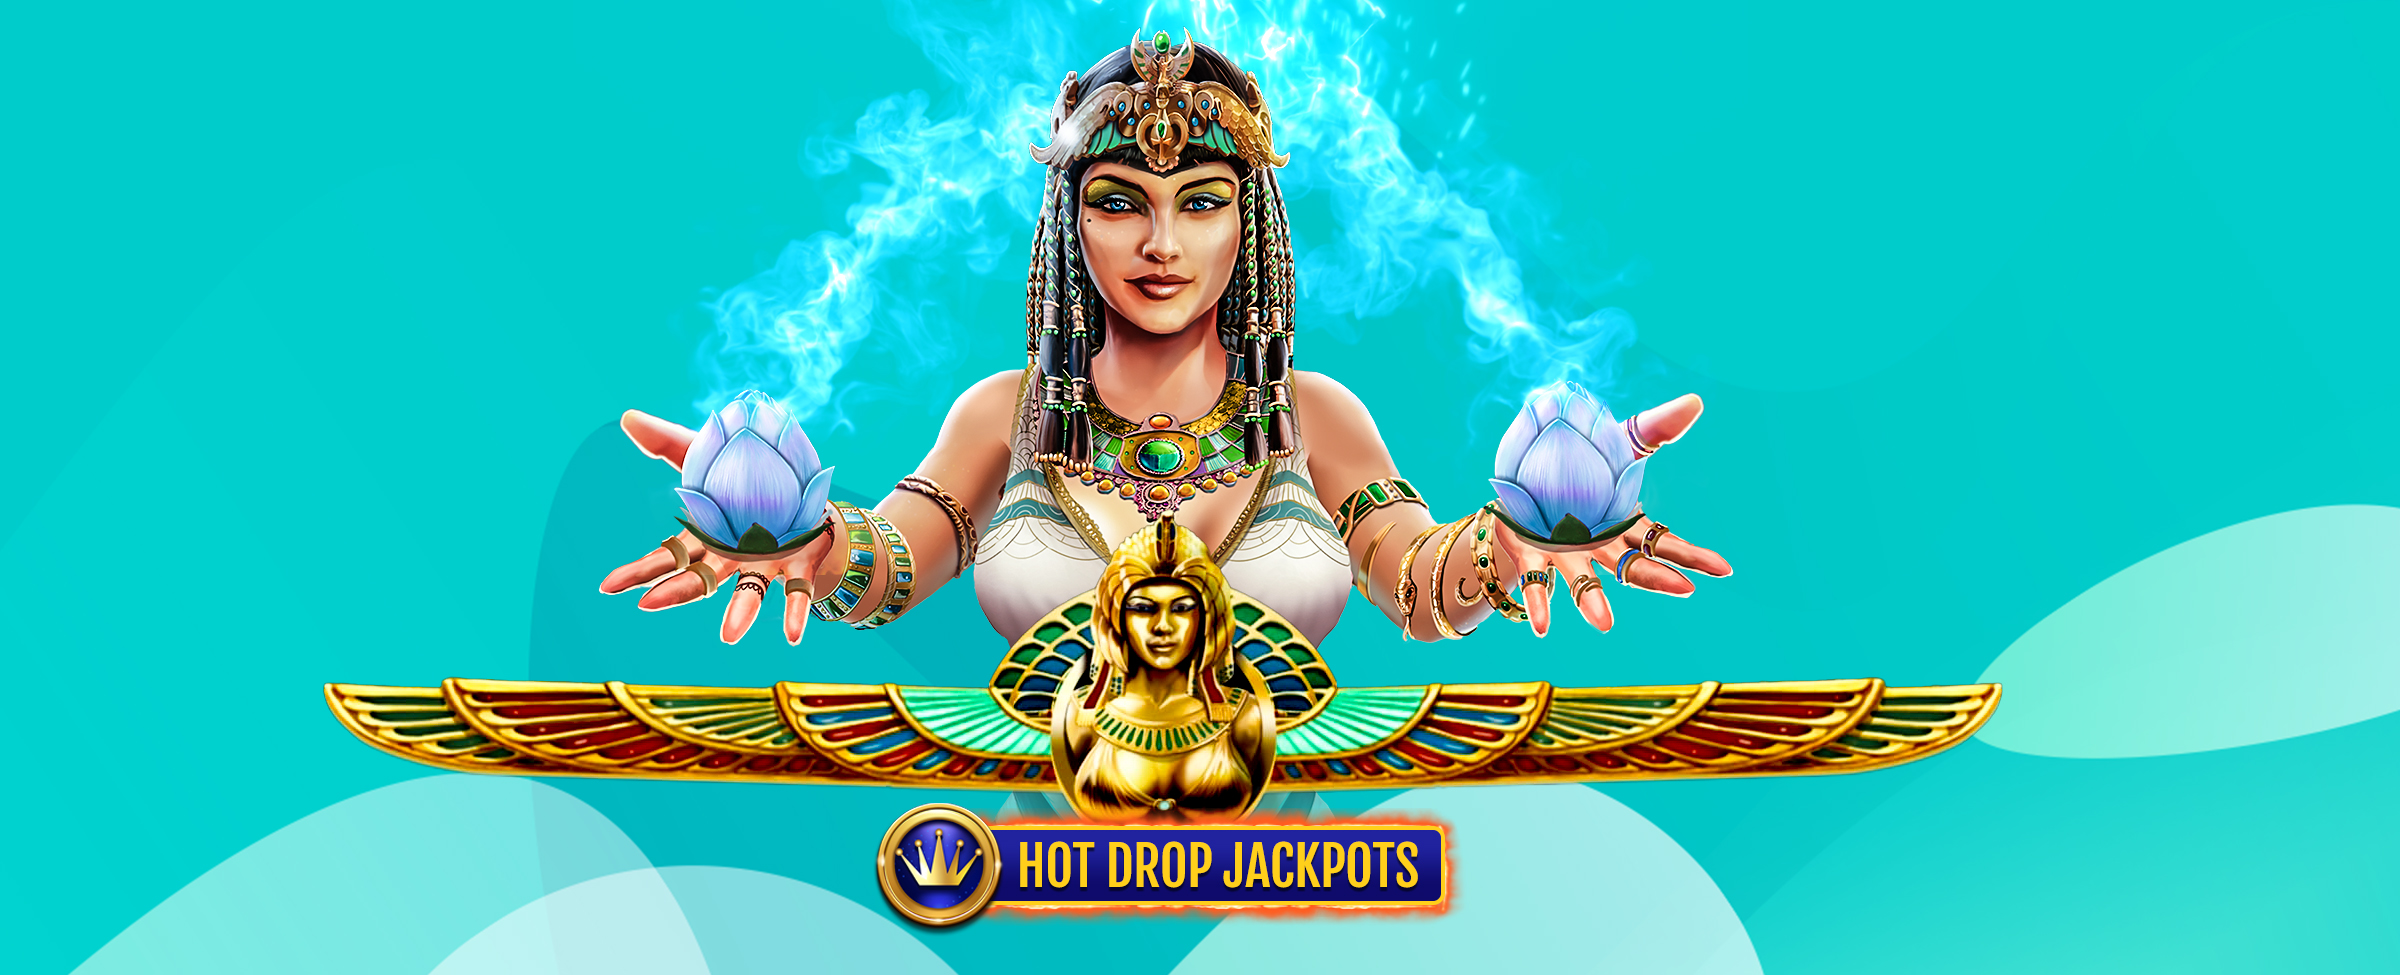 The central cartoon character from the SlotsLV slot game A Night With Cleo Hot Drop Jackpots is featured holding two flowers that are radiating magic, peering above an Egyptian emblem with the SlotsLV Hot Drop Jackpots logo beneath it.